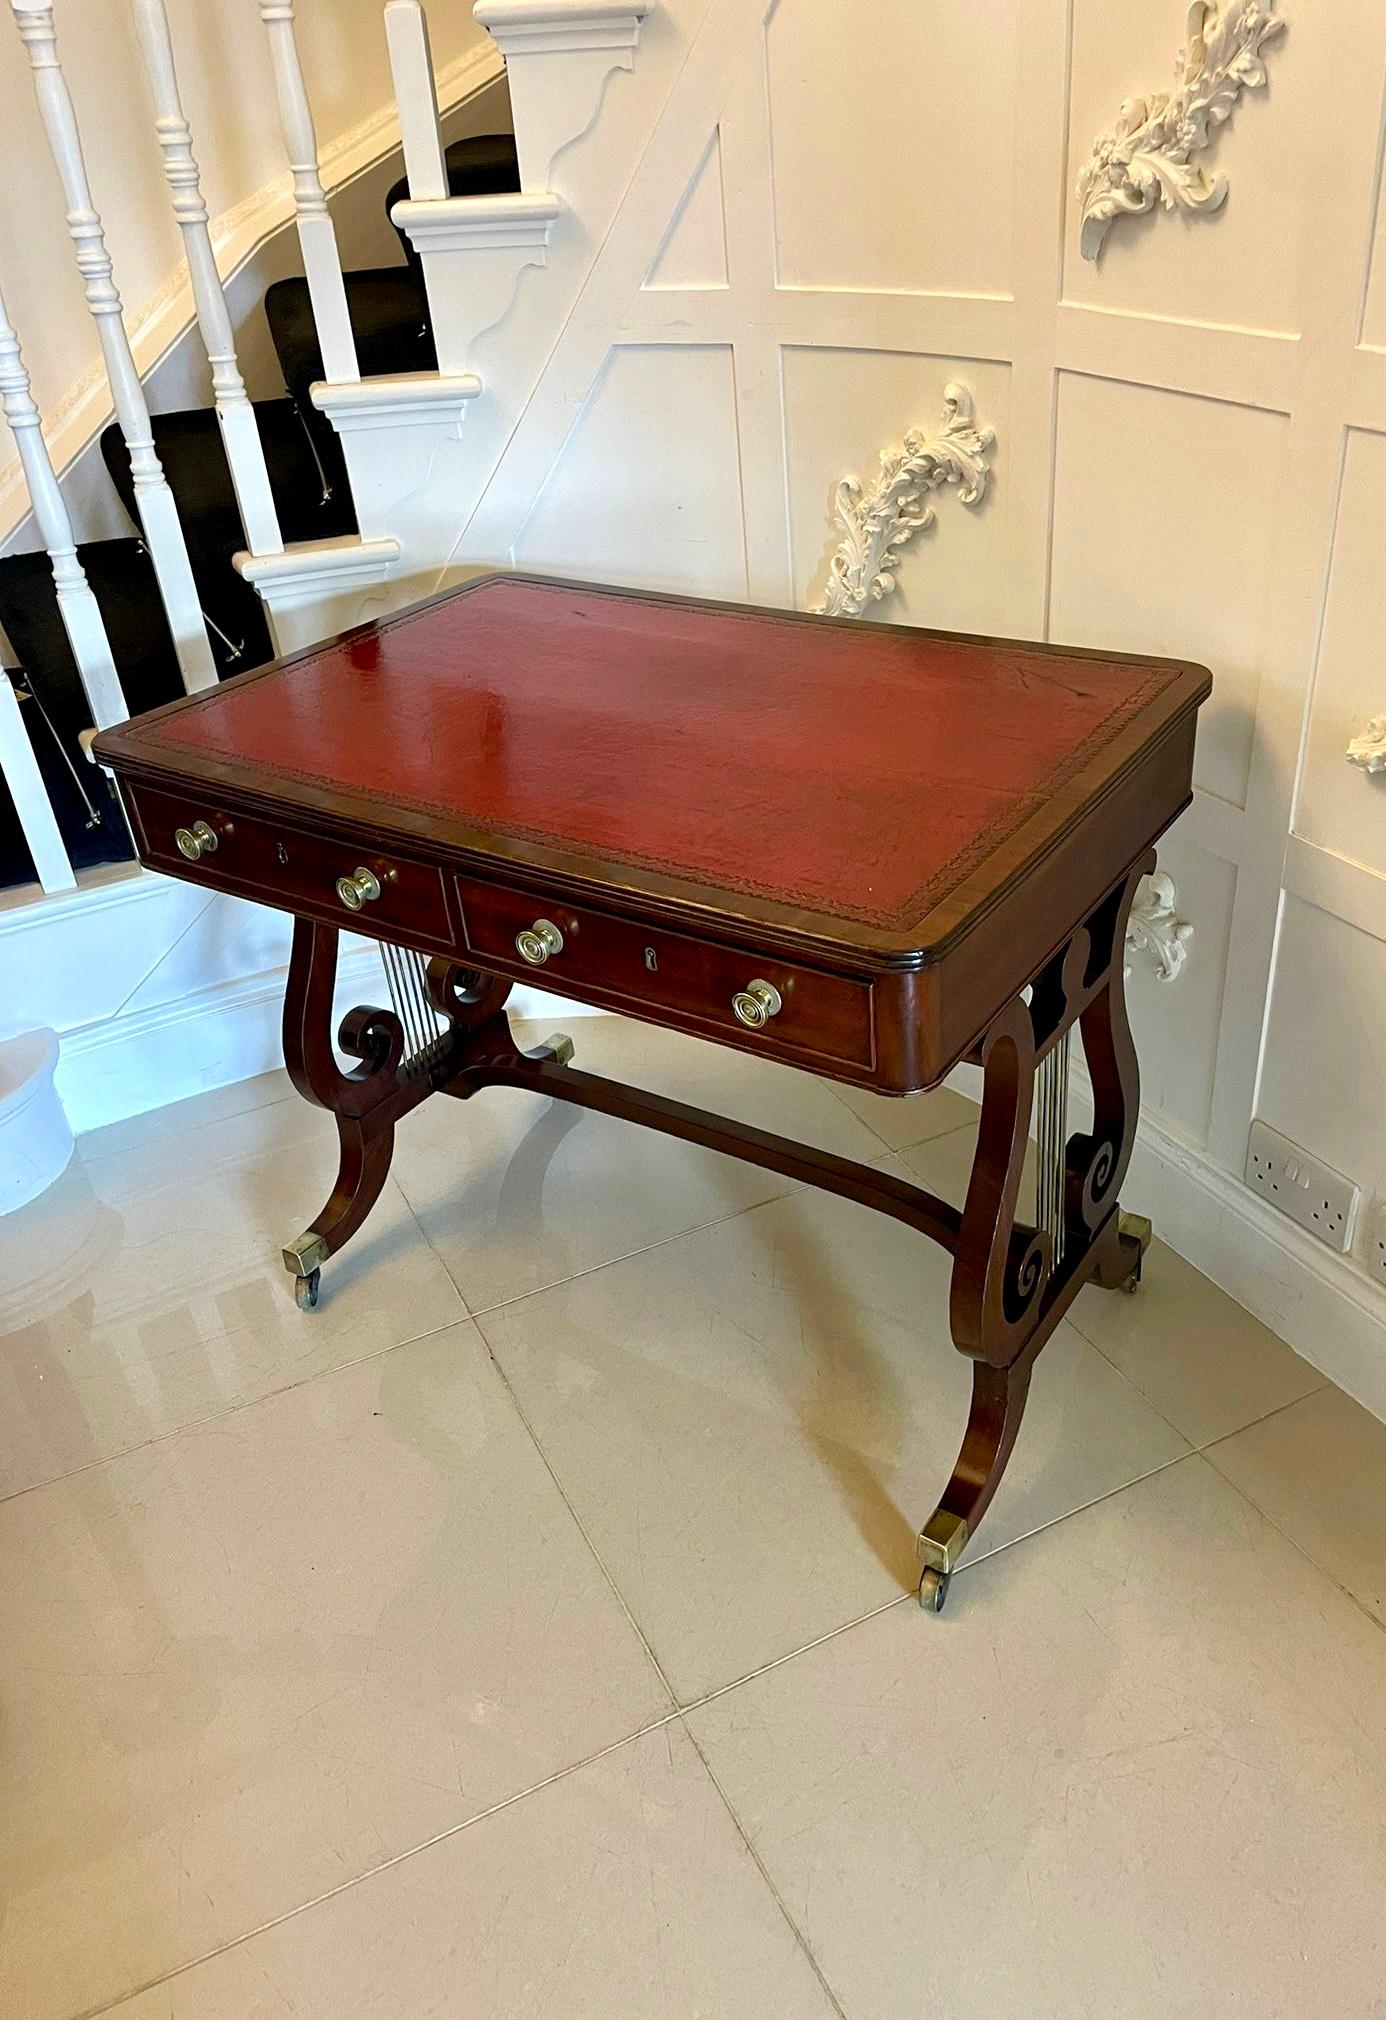 19th Century Superb Quality Antique Regency Mahogany Free Standing Writing Desk For Sale